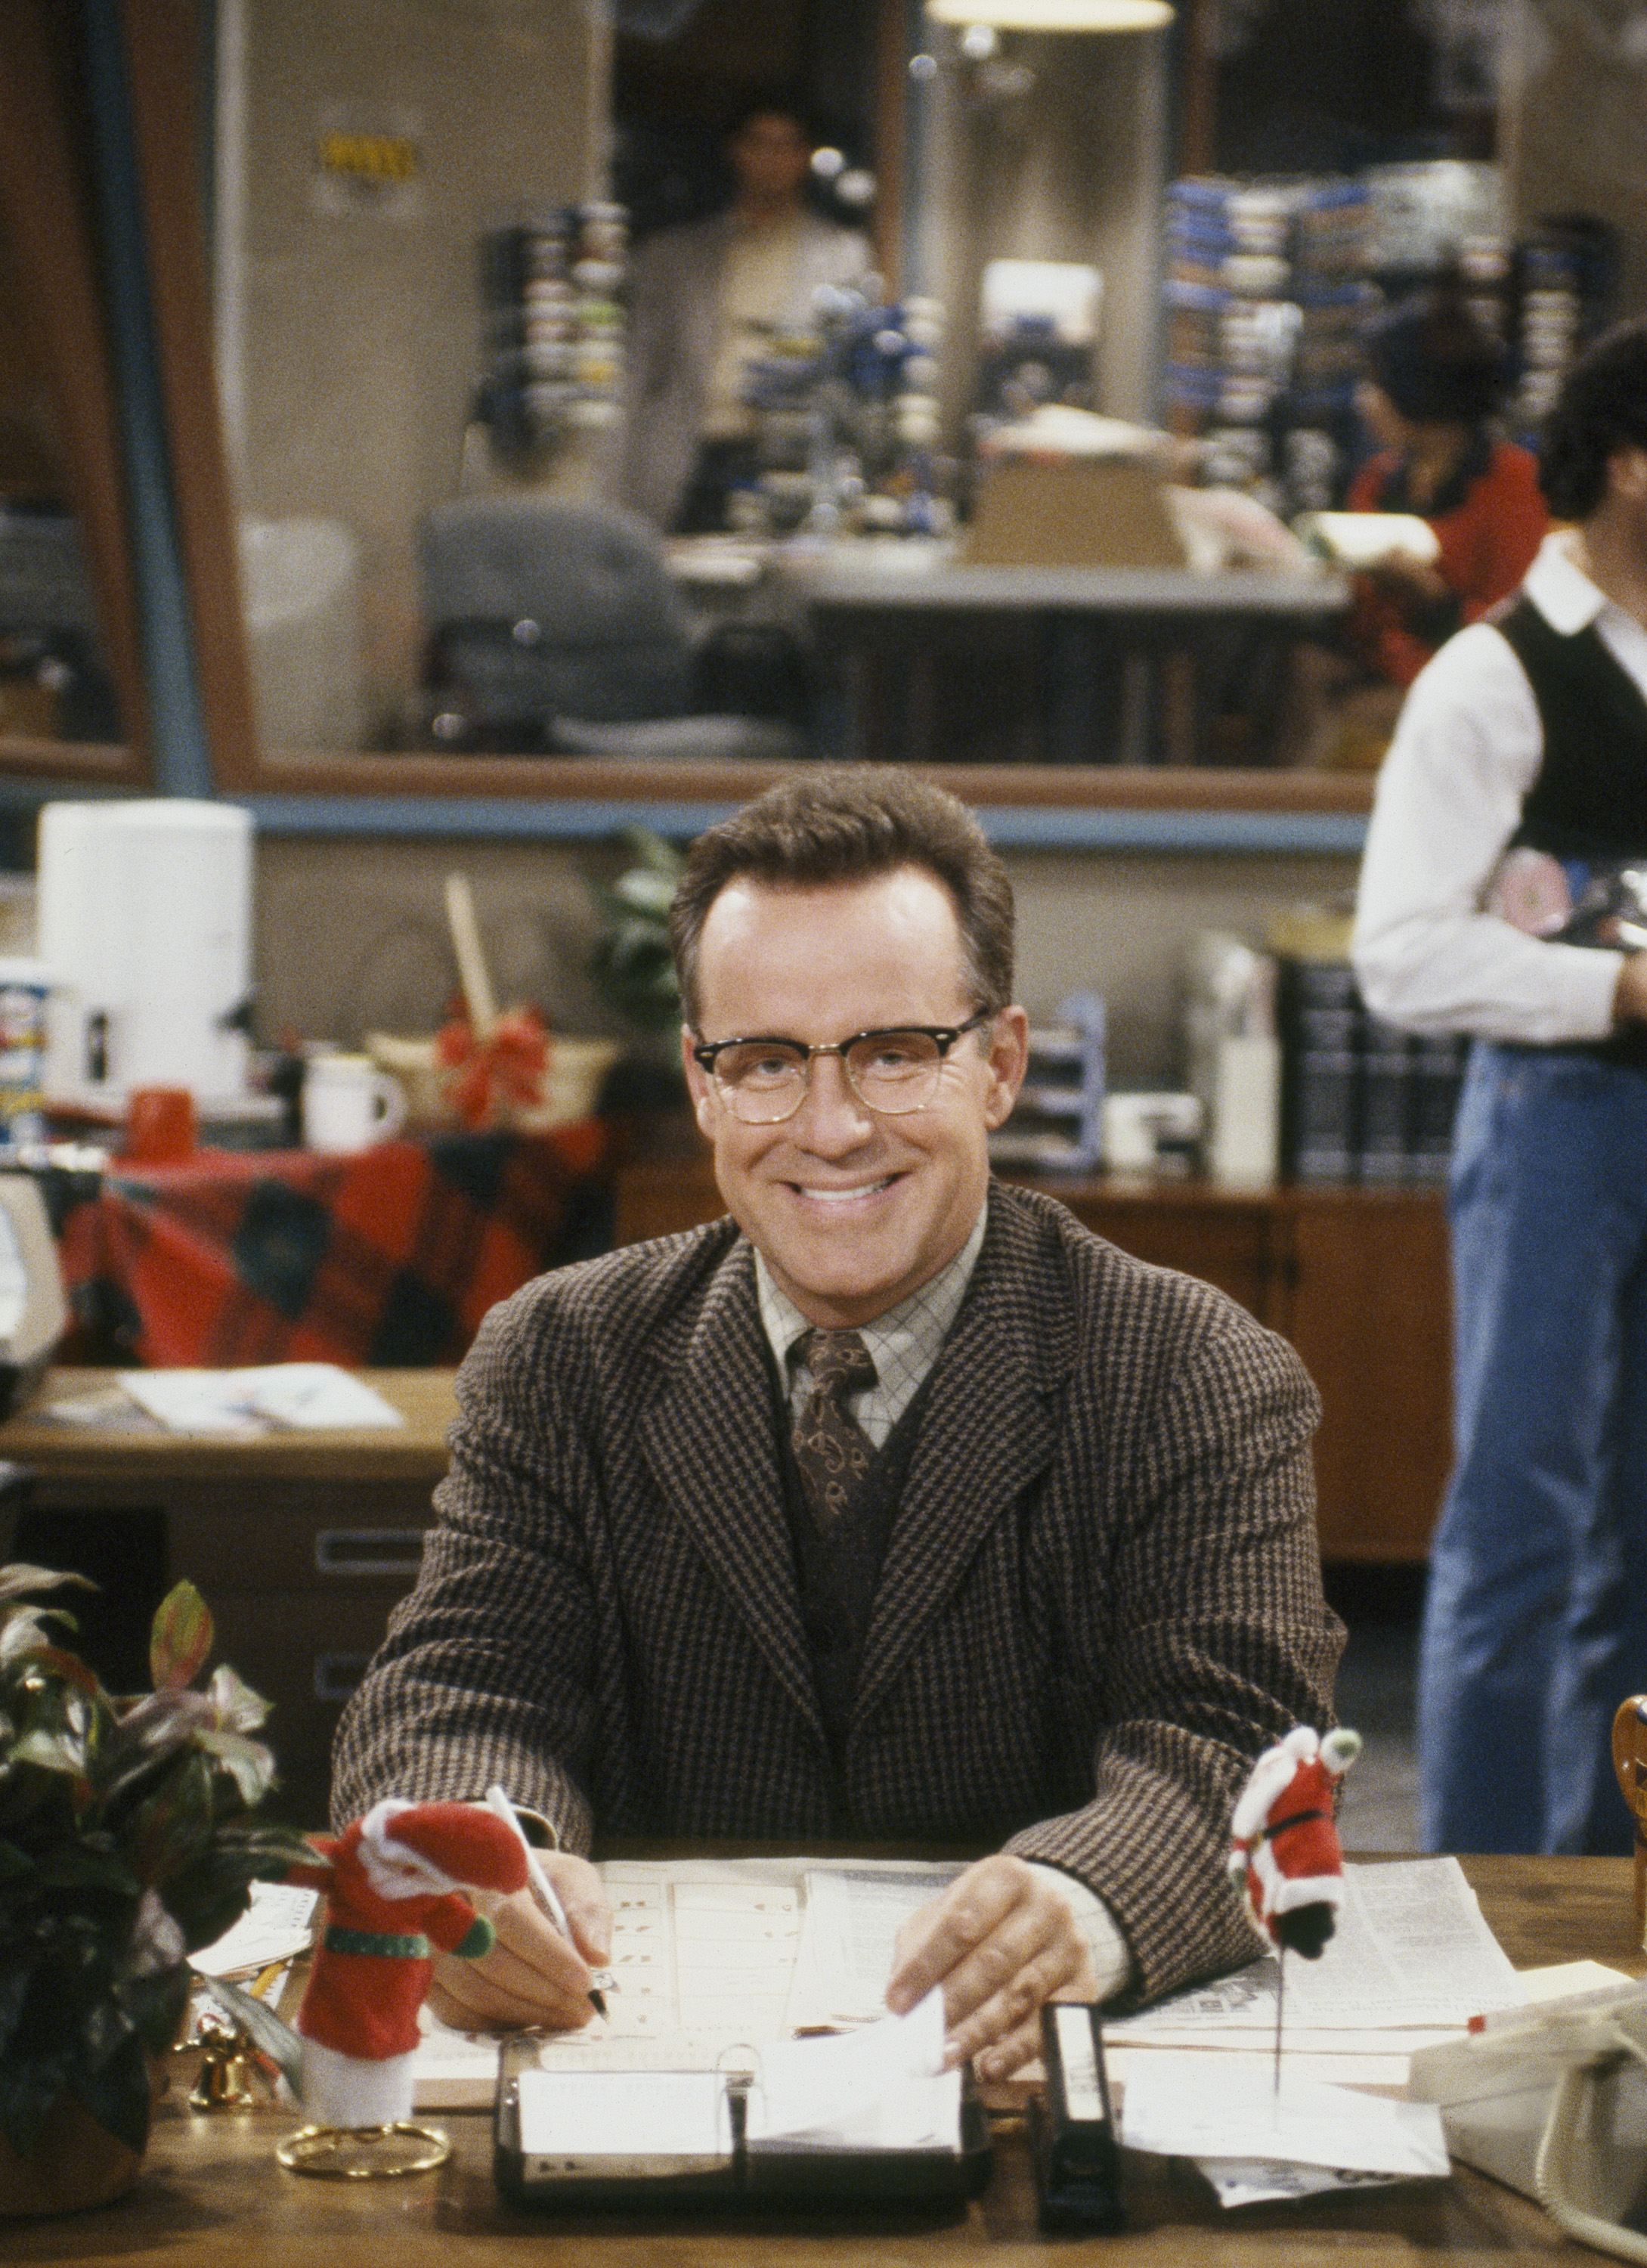 Phil Hartman in "NewsRadio," 2006 | Source: Getty Images